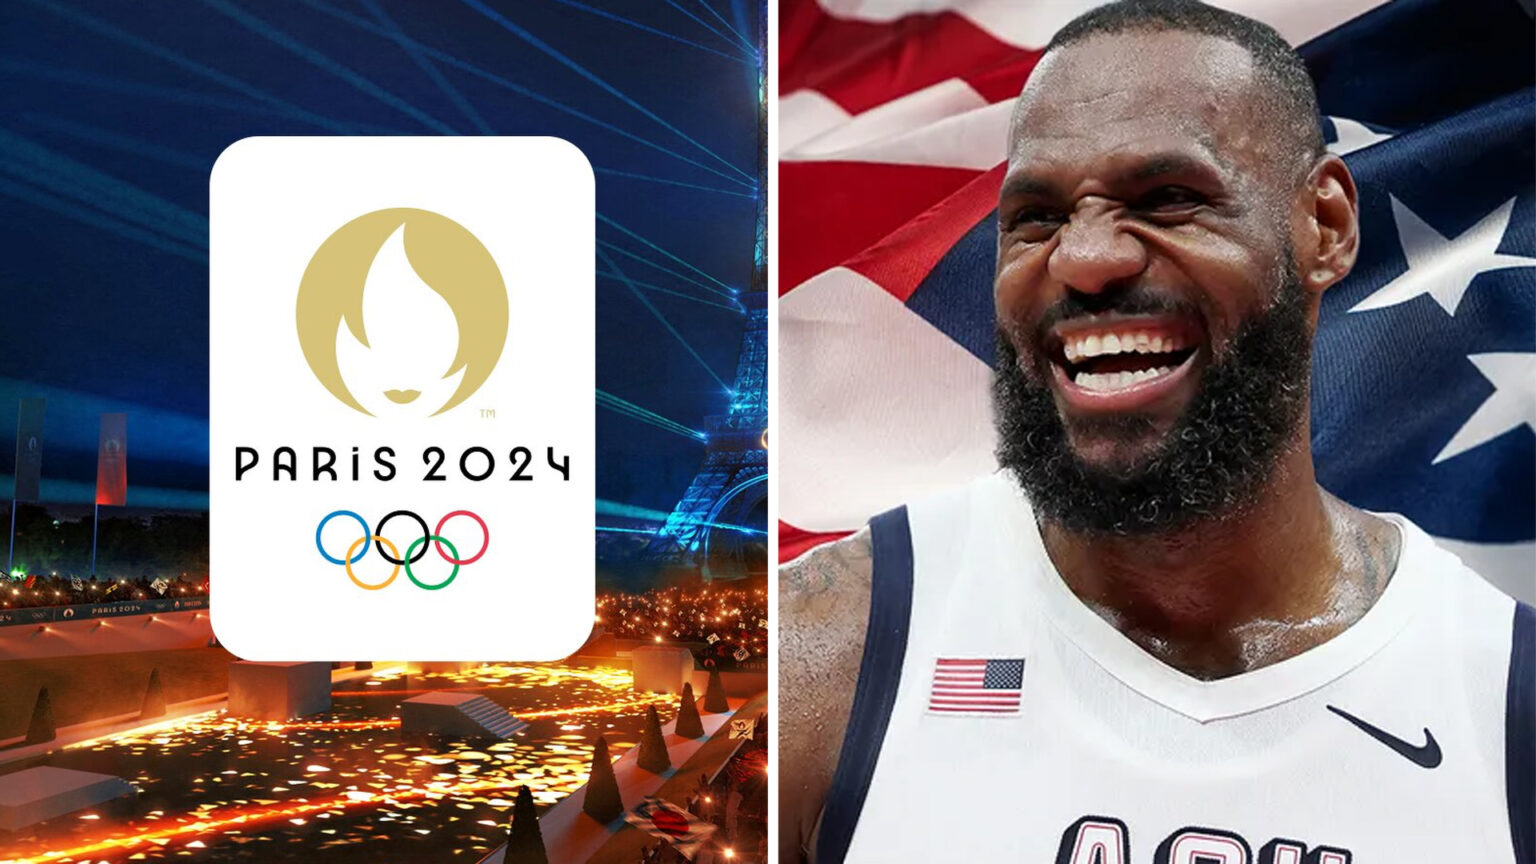 Breaking: LeBron James’ Plea to Be Flag Bearer for 2024 Paris Olympics Instantly Rejected, “You Don’t Represent America”